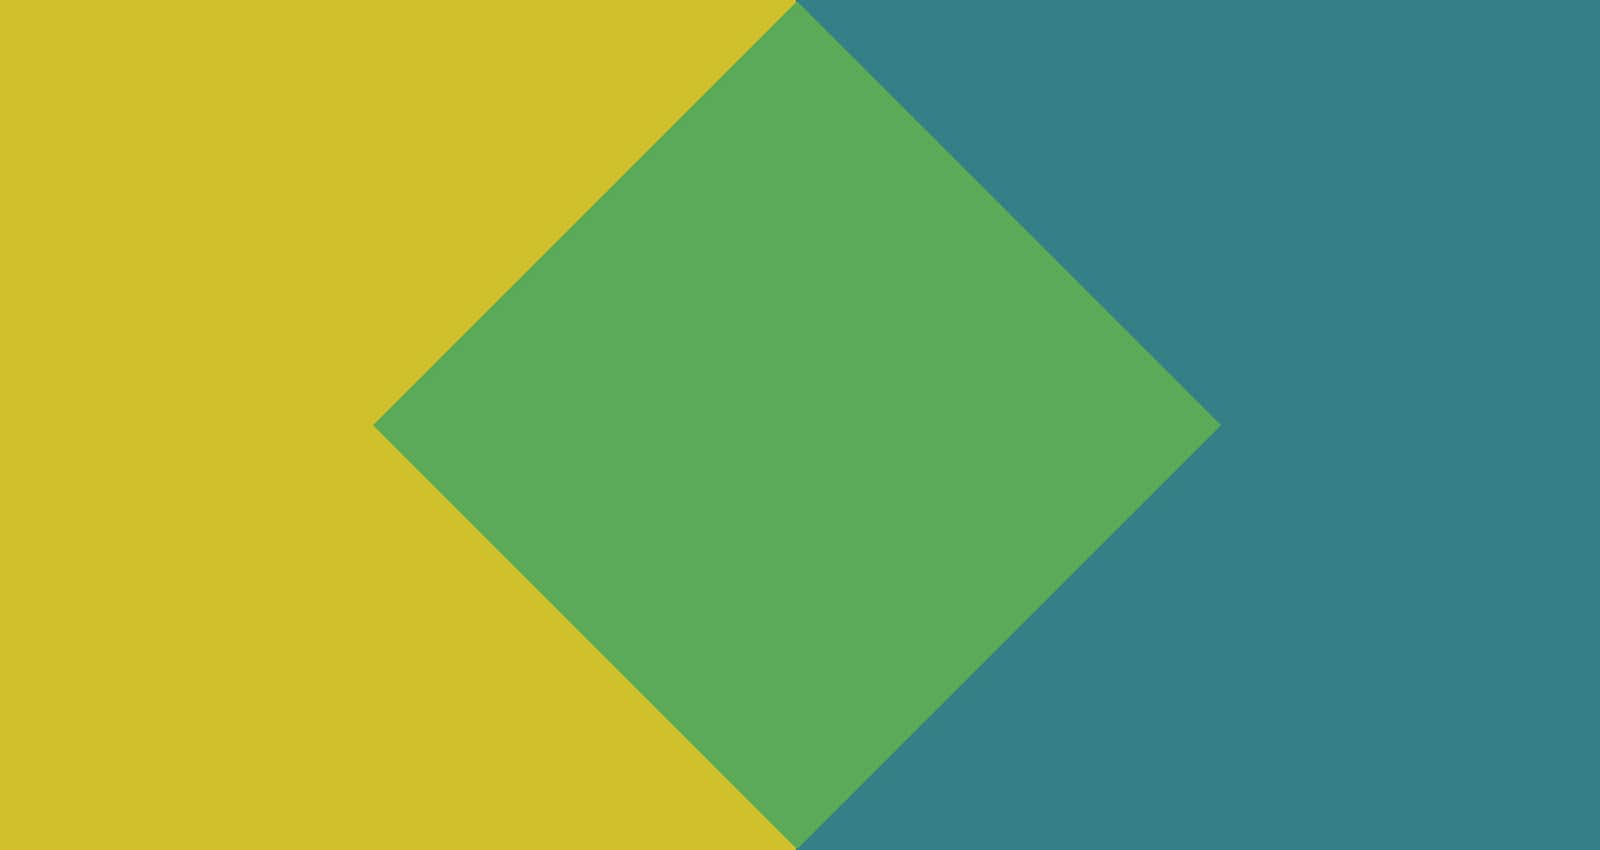 Off-site construction methods convergence represented by blue and yellow shapes making green in center